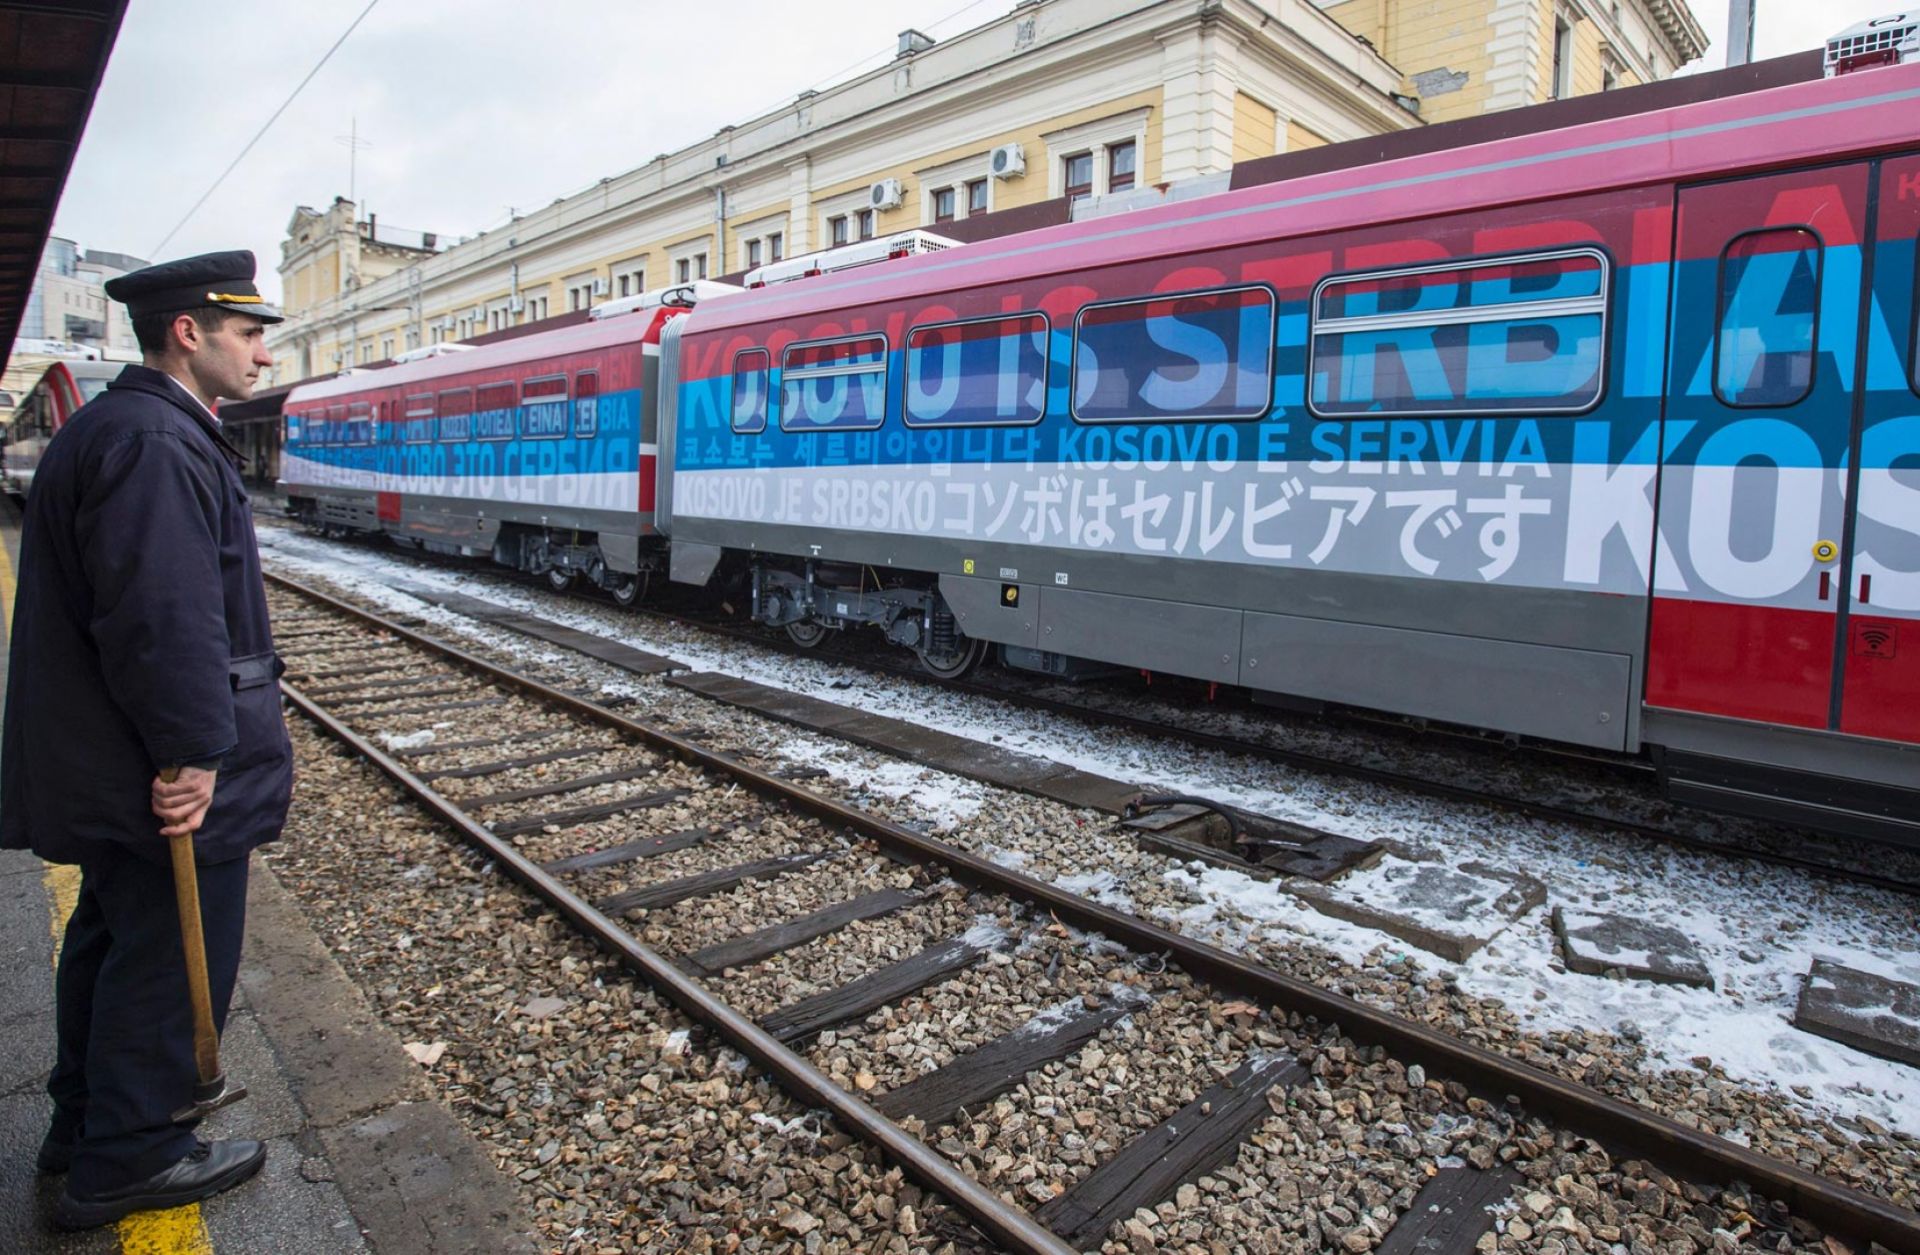 In January, conflict almost erupted in the Balkans after the Kosovar government dispatched special police forces to stop a Serbian train headed into Kosovo's majority-Serb northern territory, emblazoned with the slogan "Kosovo is Serbia" in 21 languages.